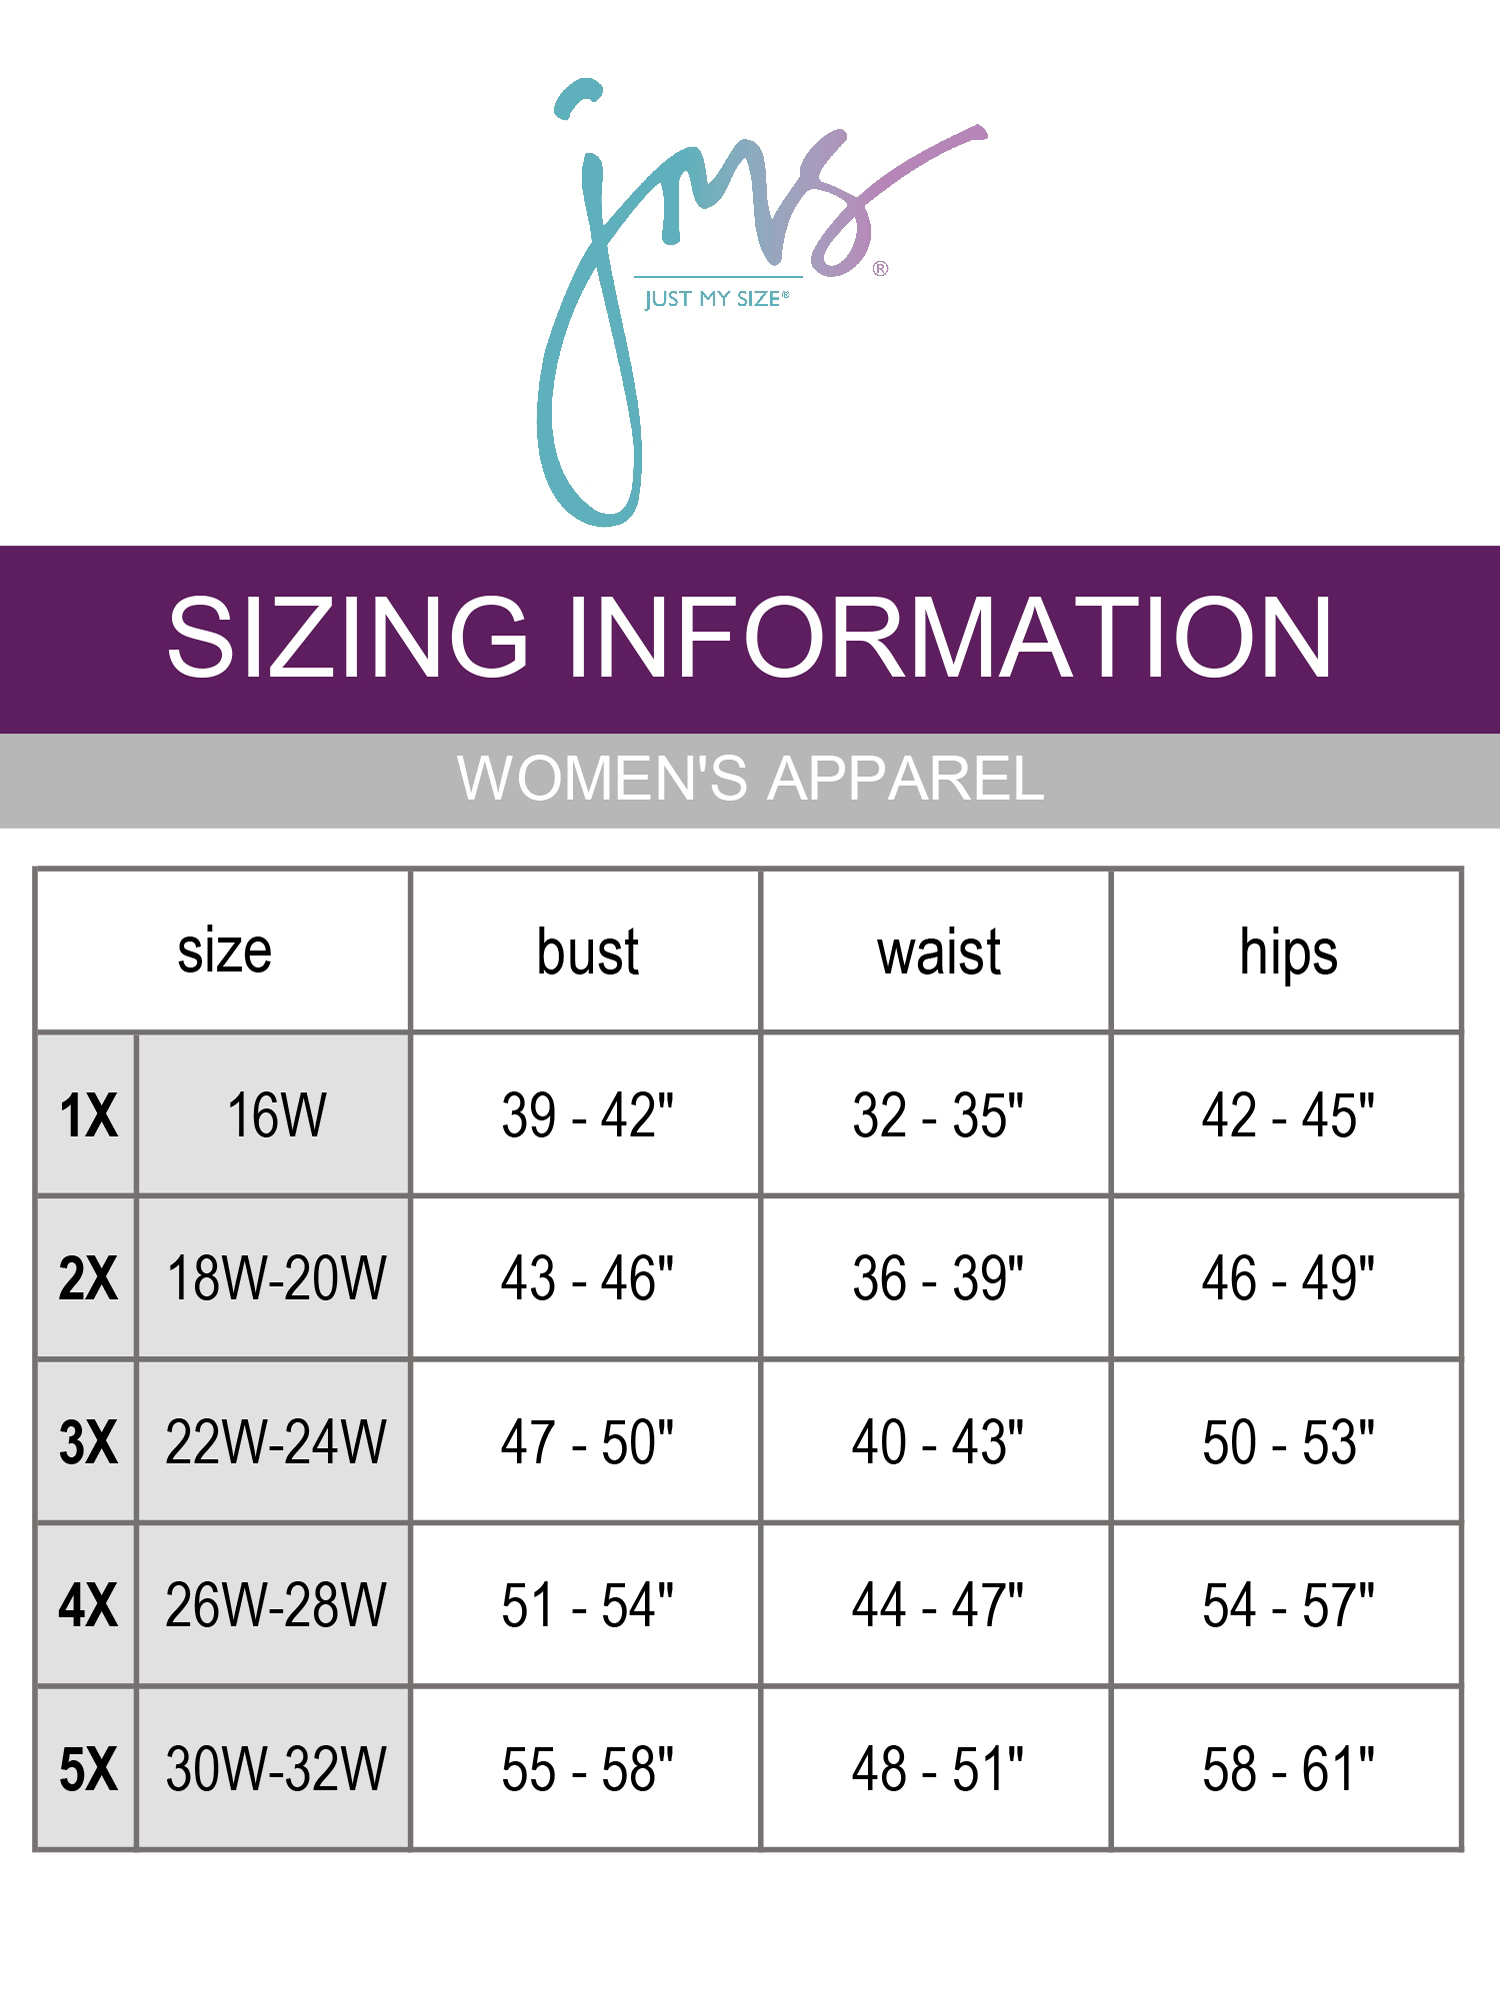 Just My Size Women's Plus Size Graphic Short Sleeve V-neck Tee - image 3 of 5